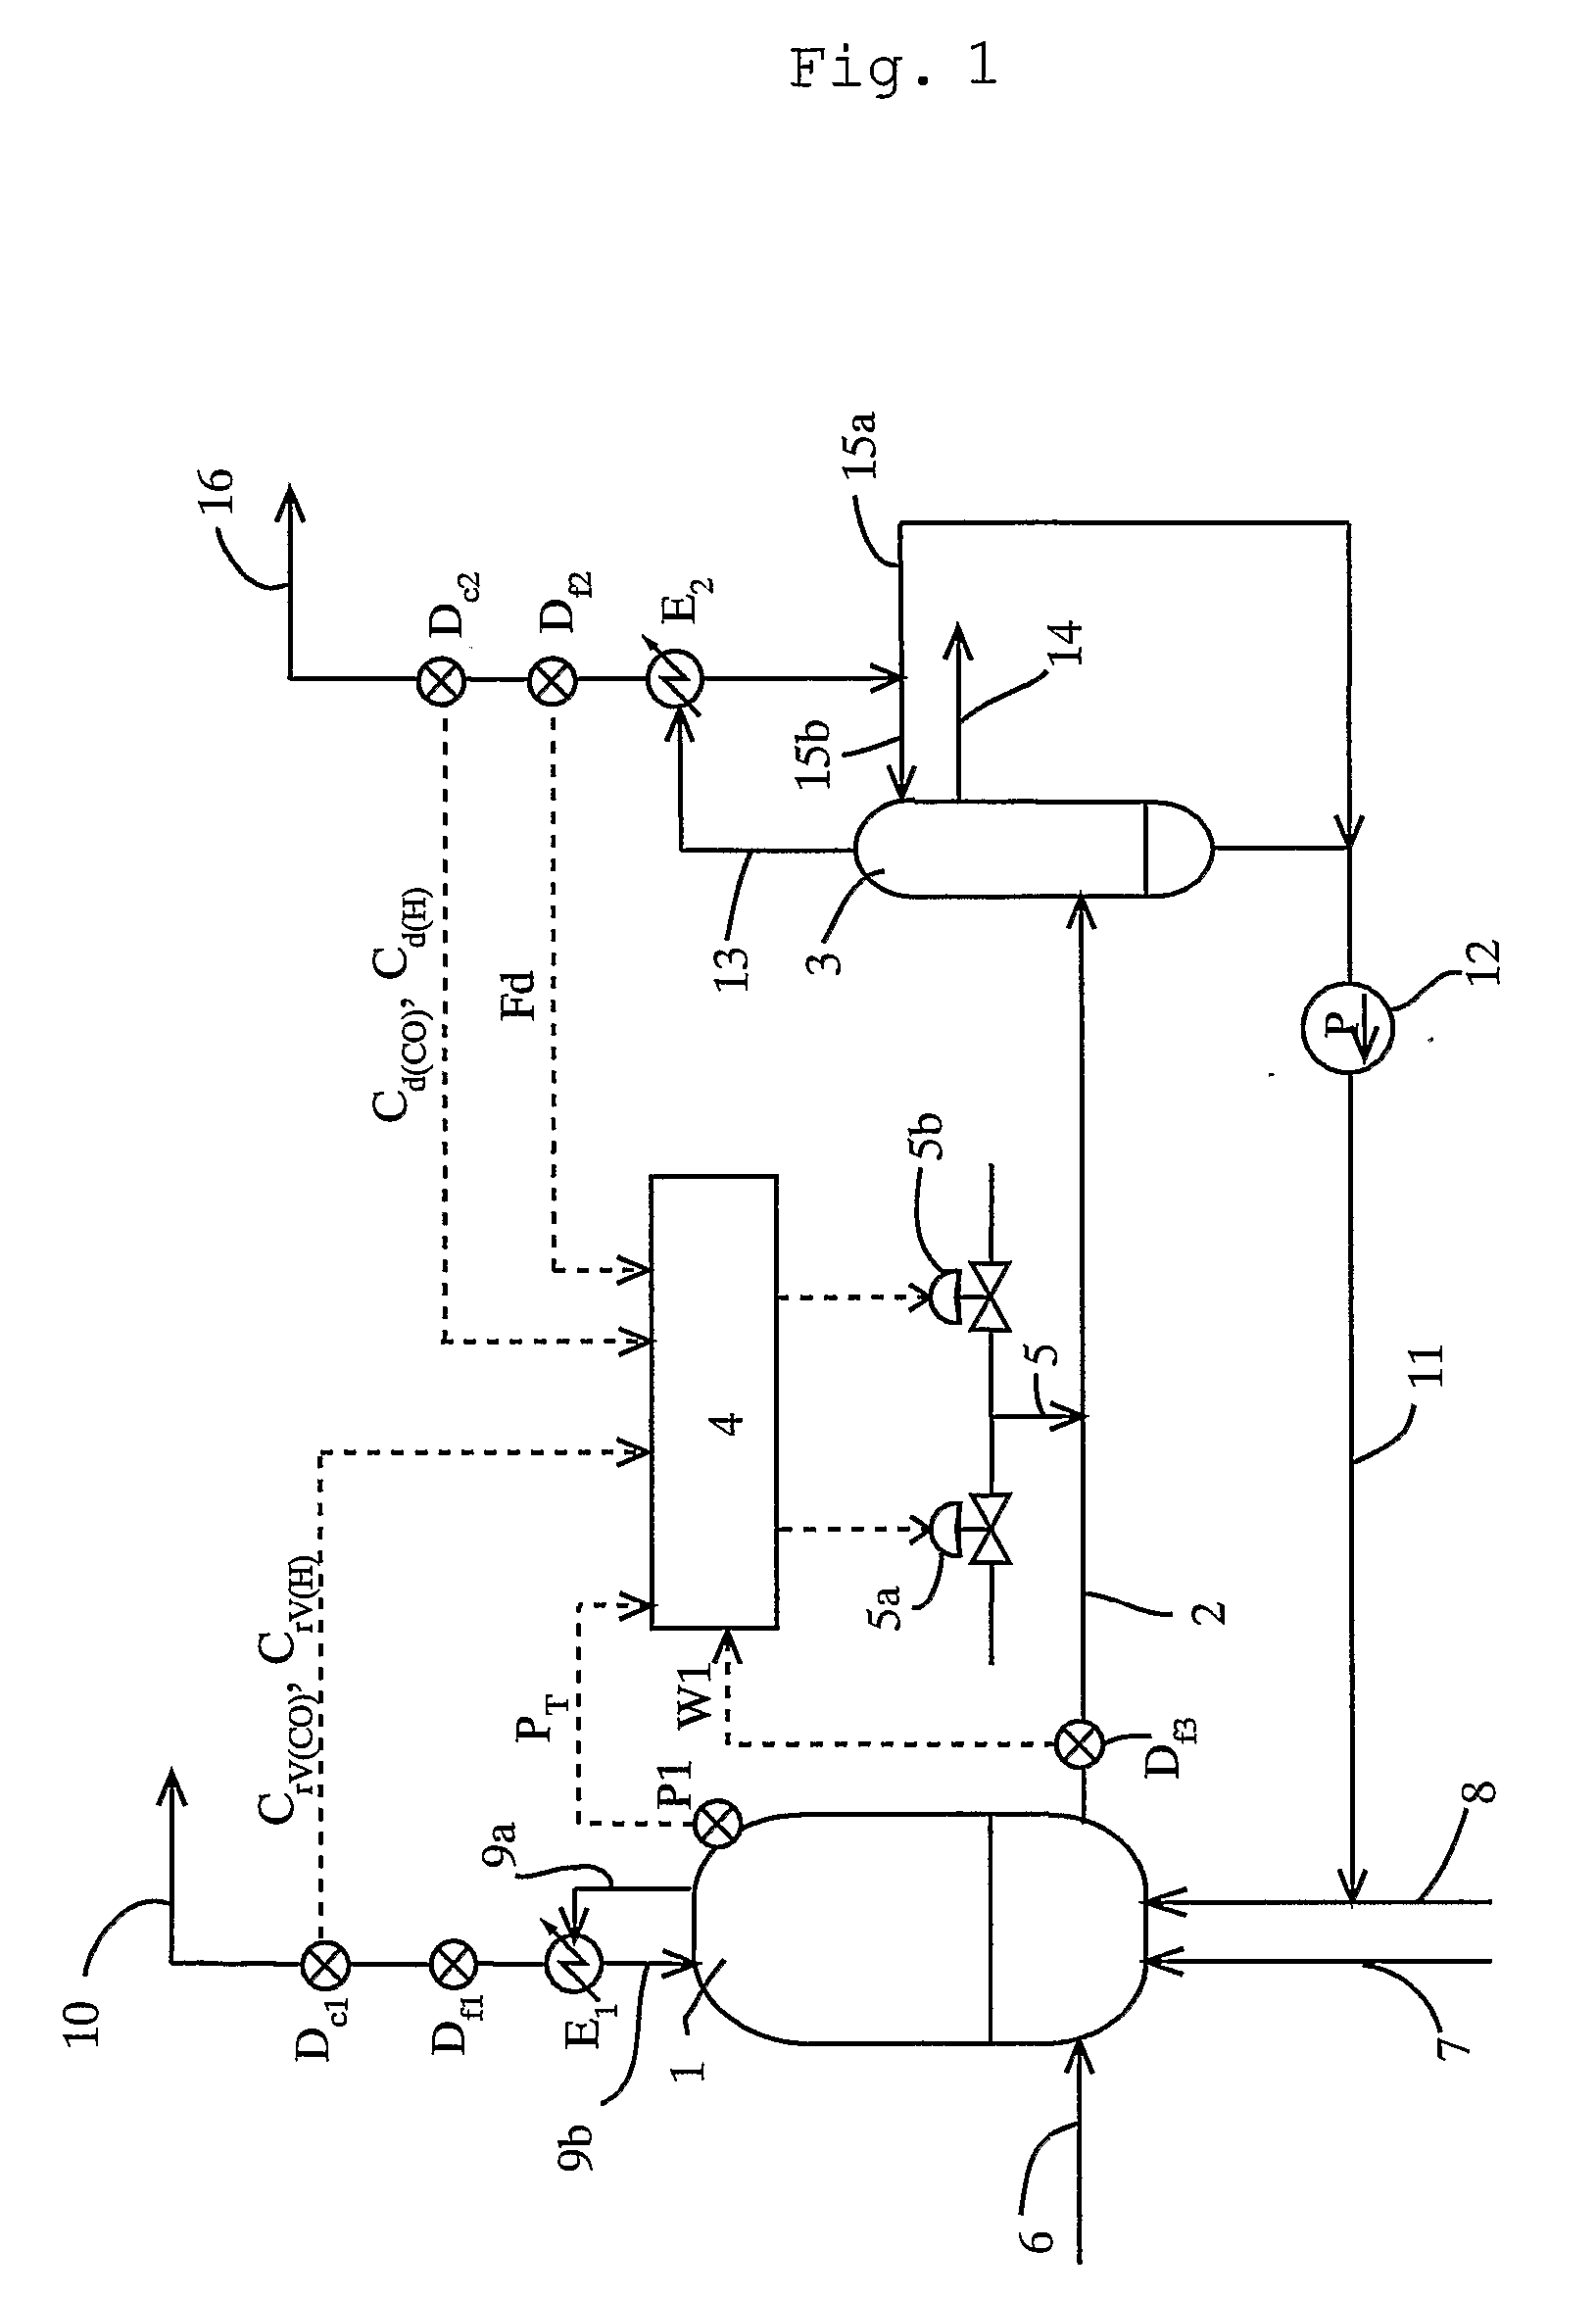 Process for Producing Acetic Acid